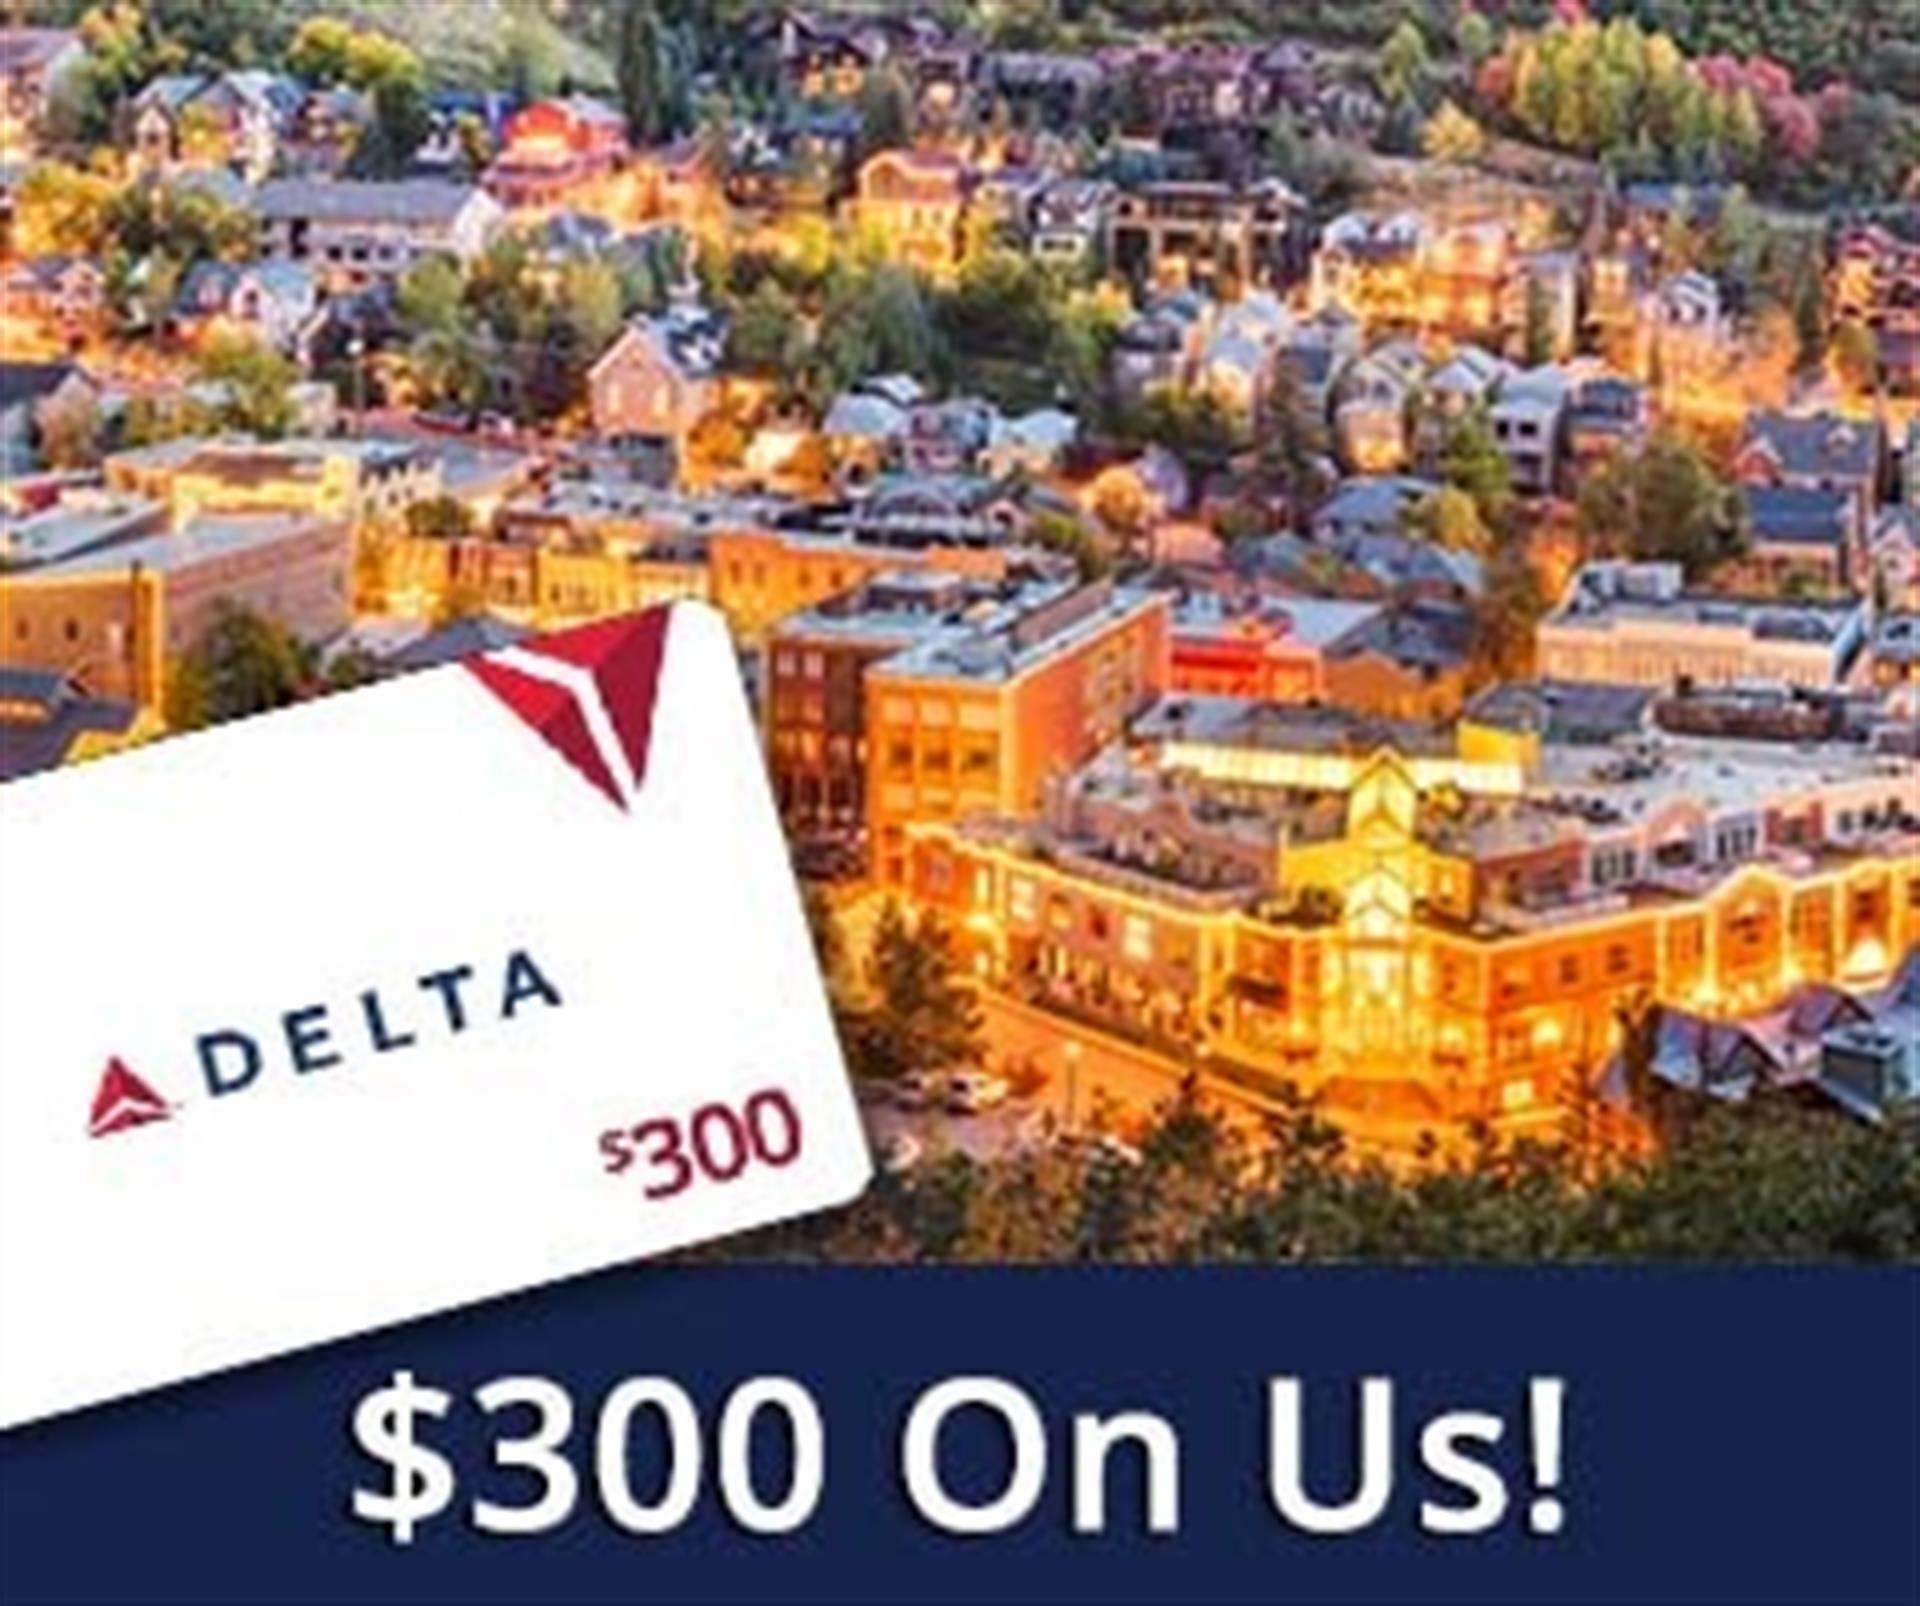 Park City a glow with lights and white Delta gift card 300 on us